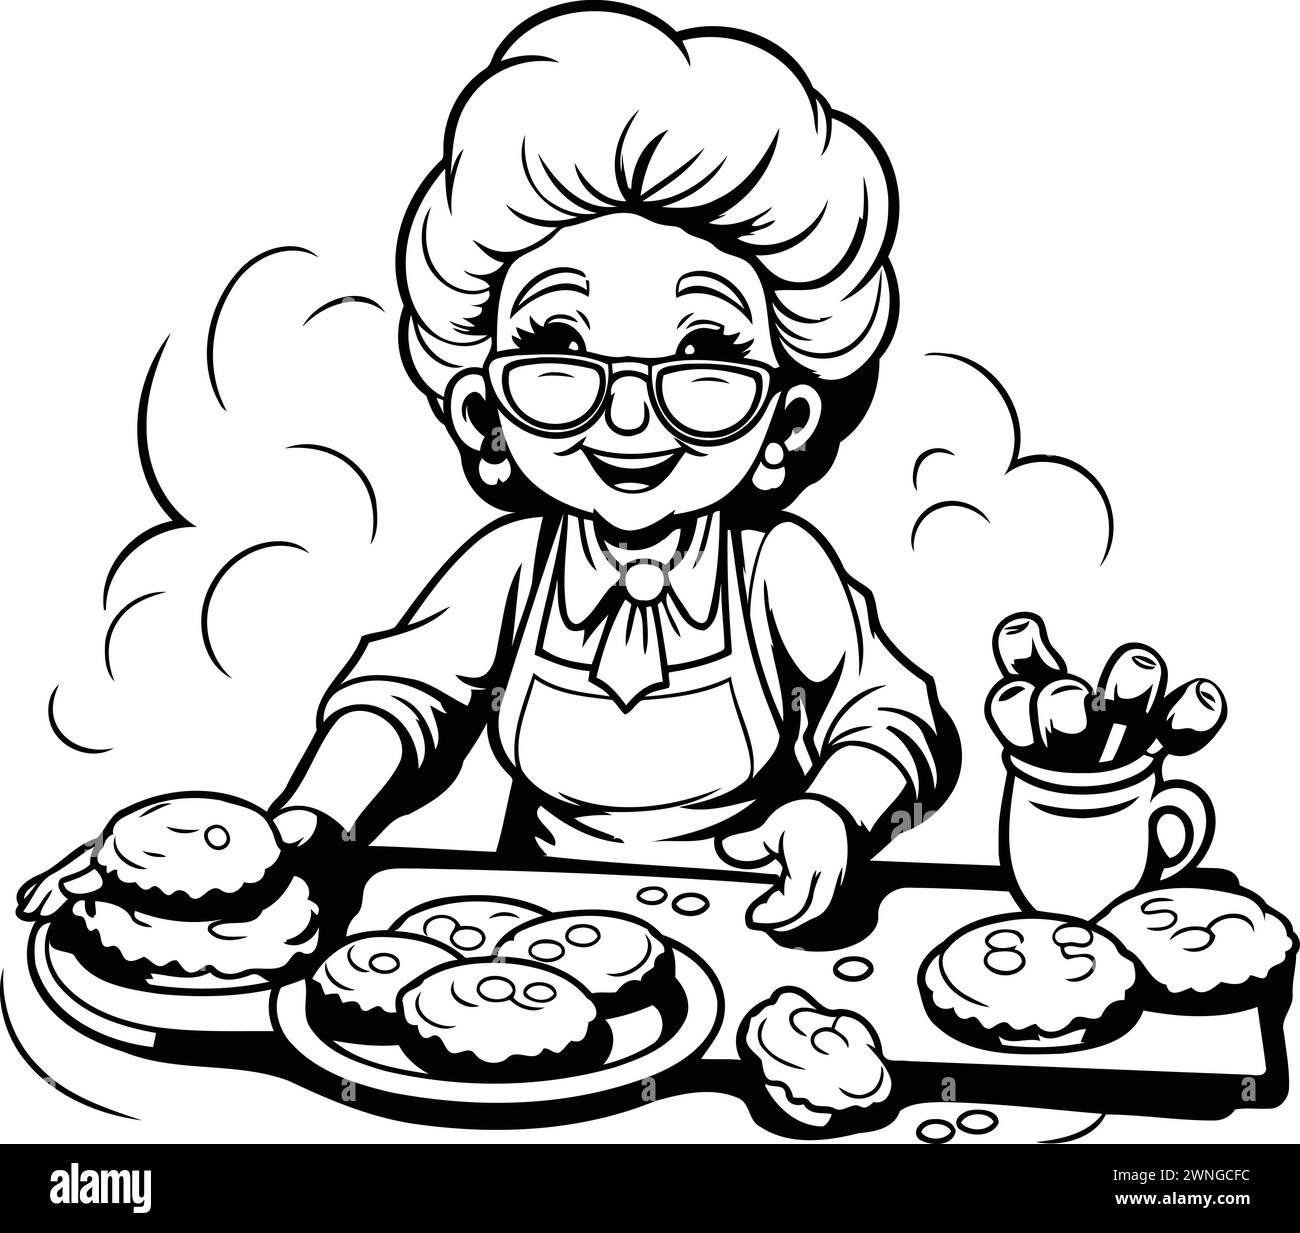 Grandmother baking cookies. Black and white vector illustration for coloring book. Stock Vector